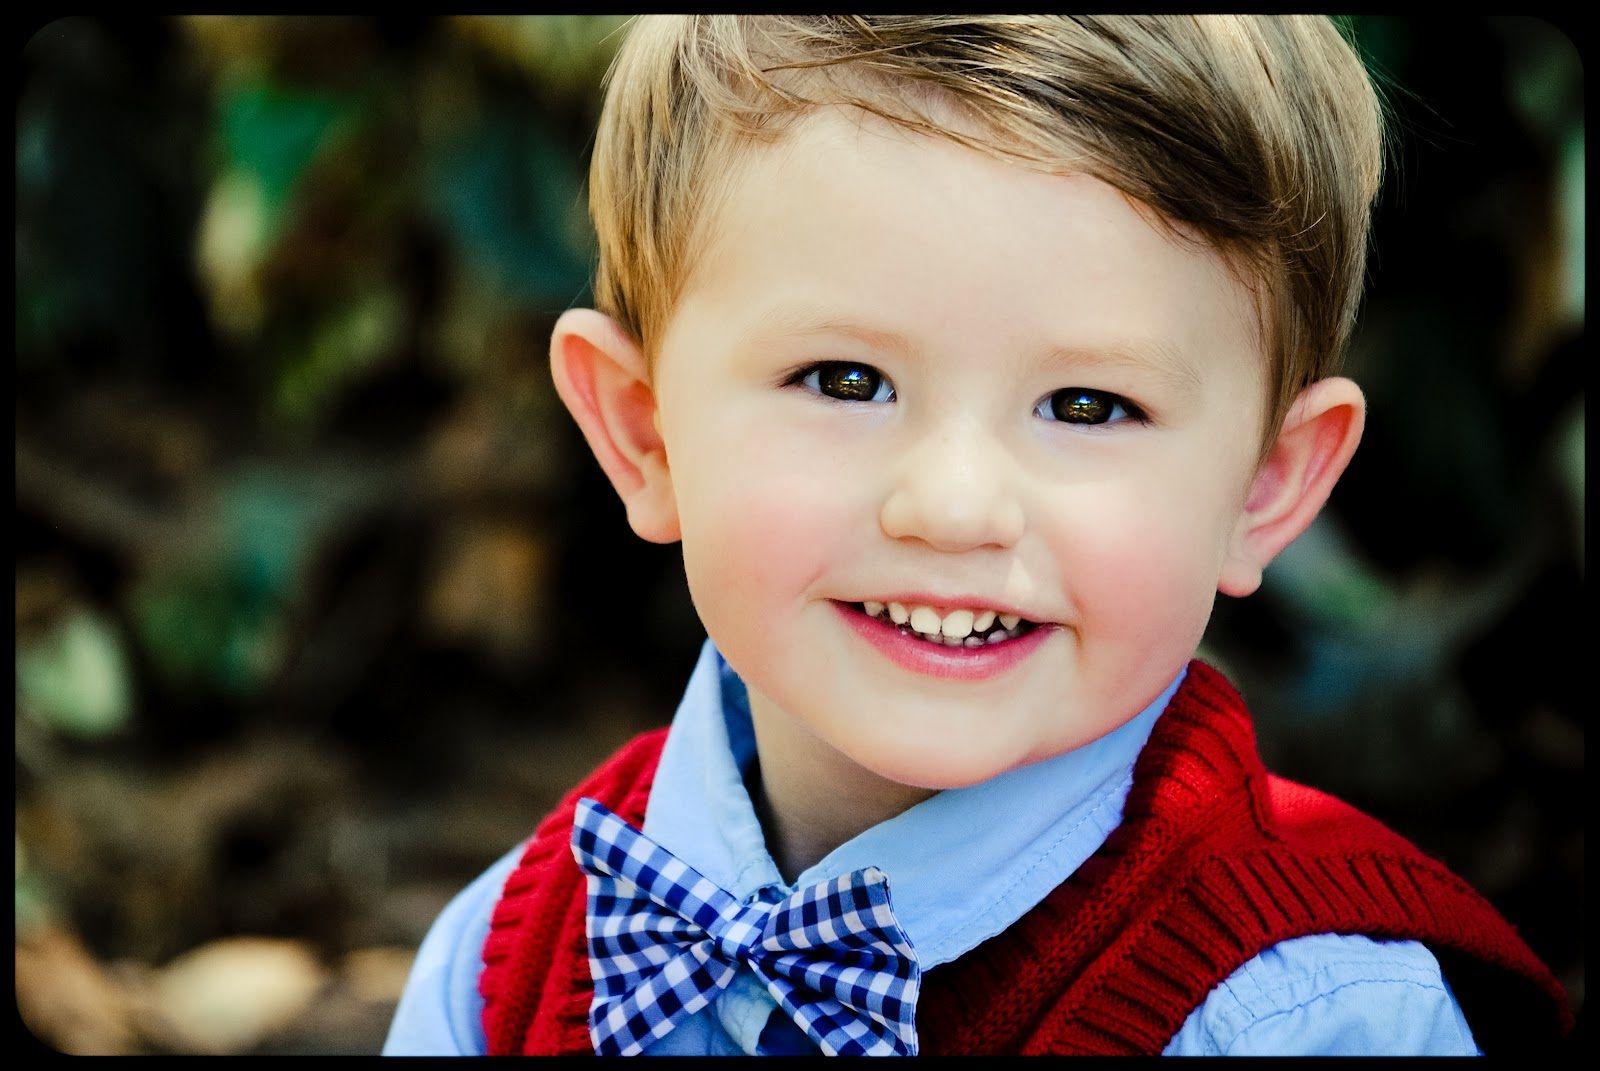 Desktop For Widescreen Cute Baby Boy New HD With Stylish Boys